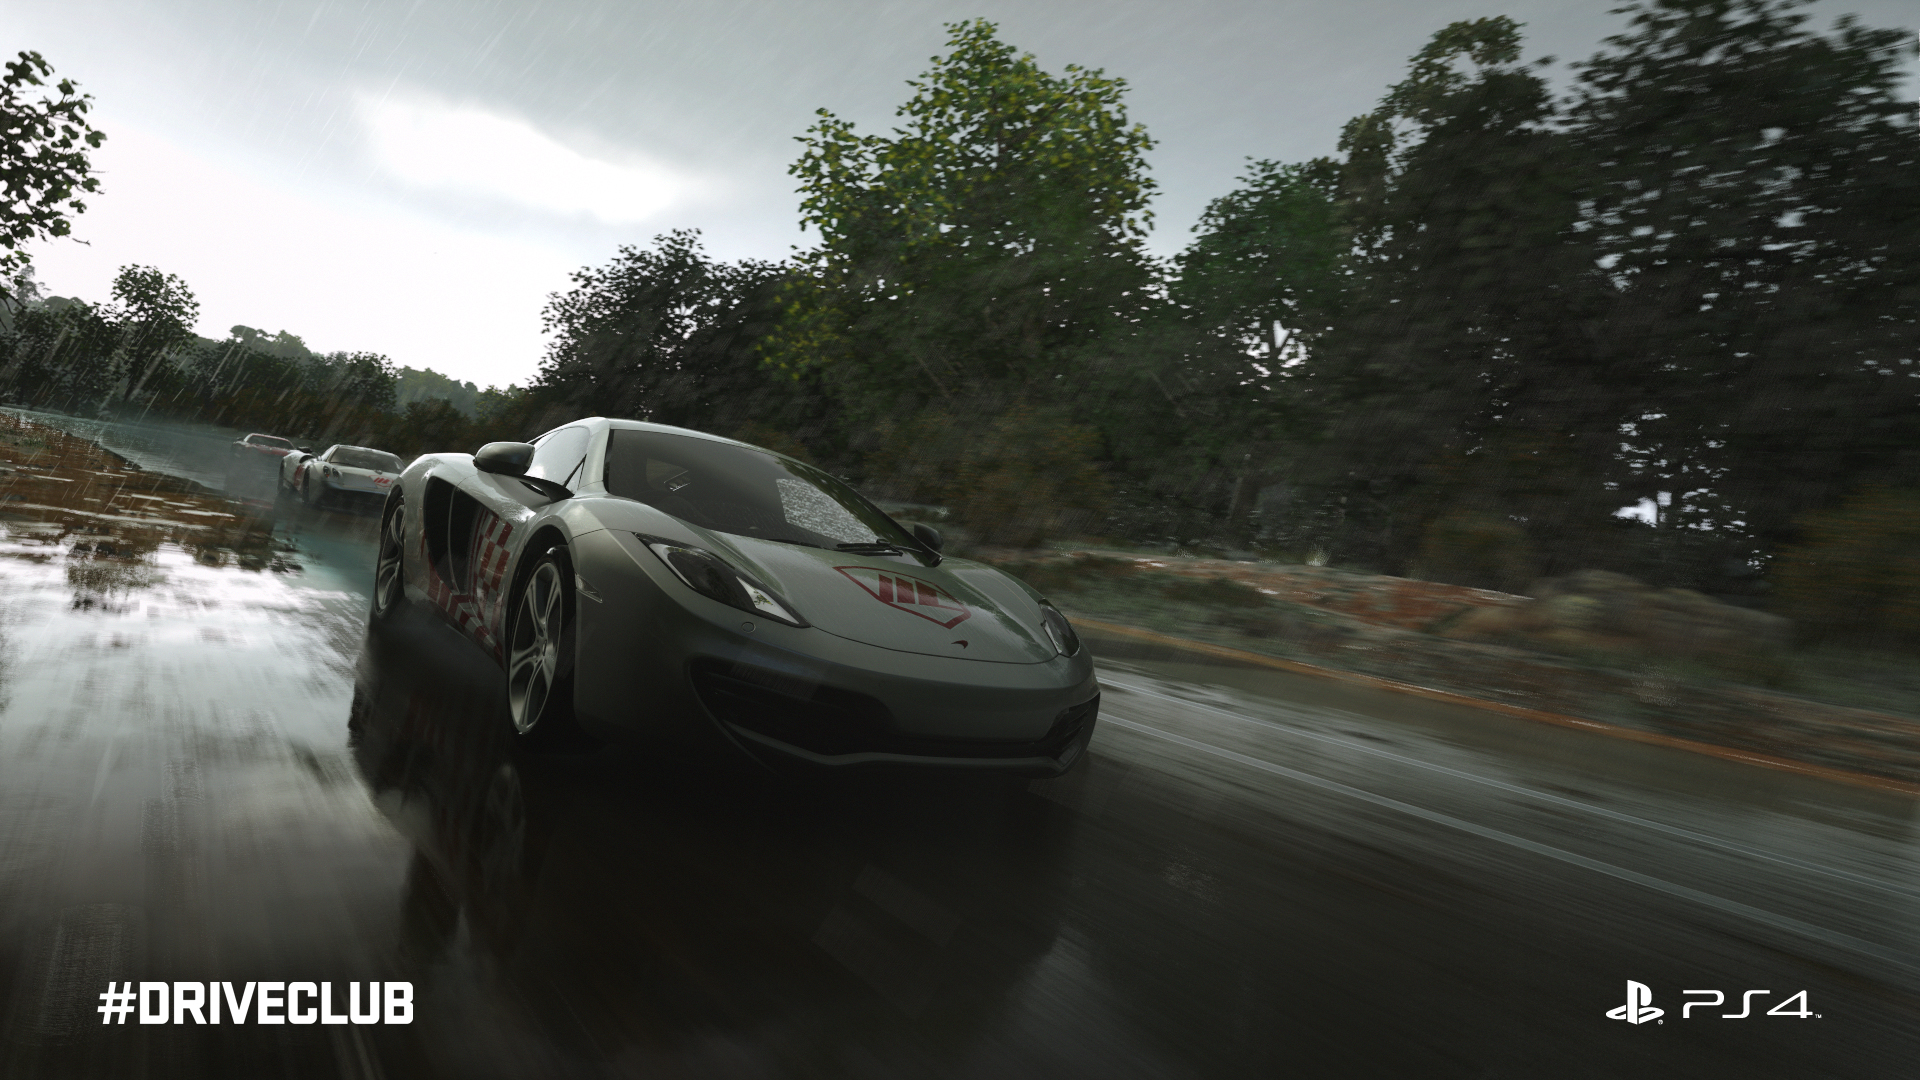 DriveClub May Come to VR, Prototype at Paris Games Show – Road to VR